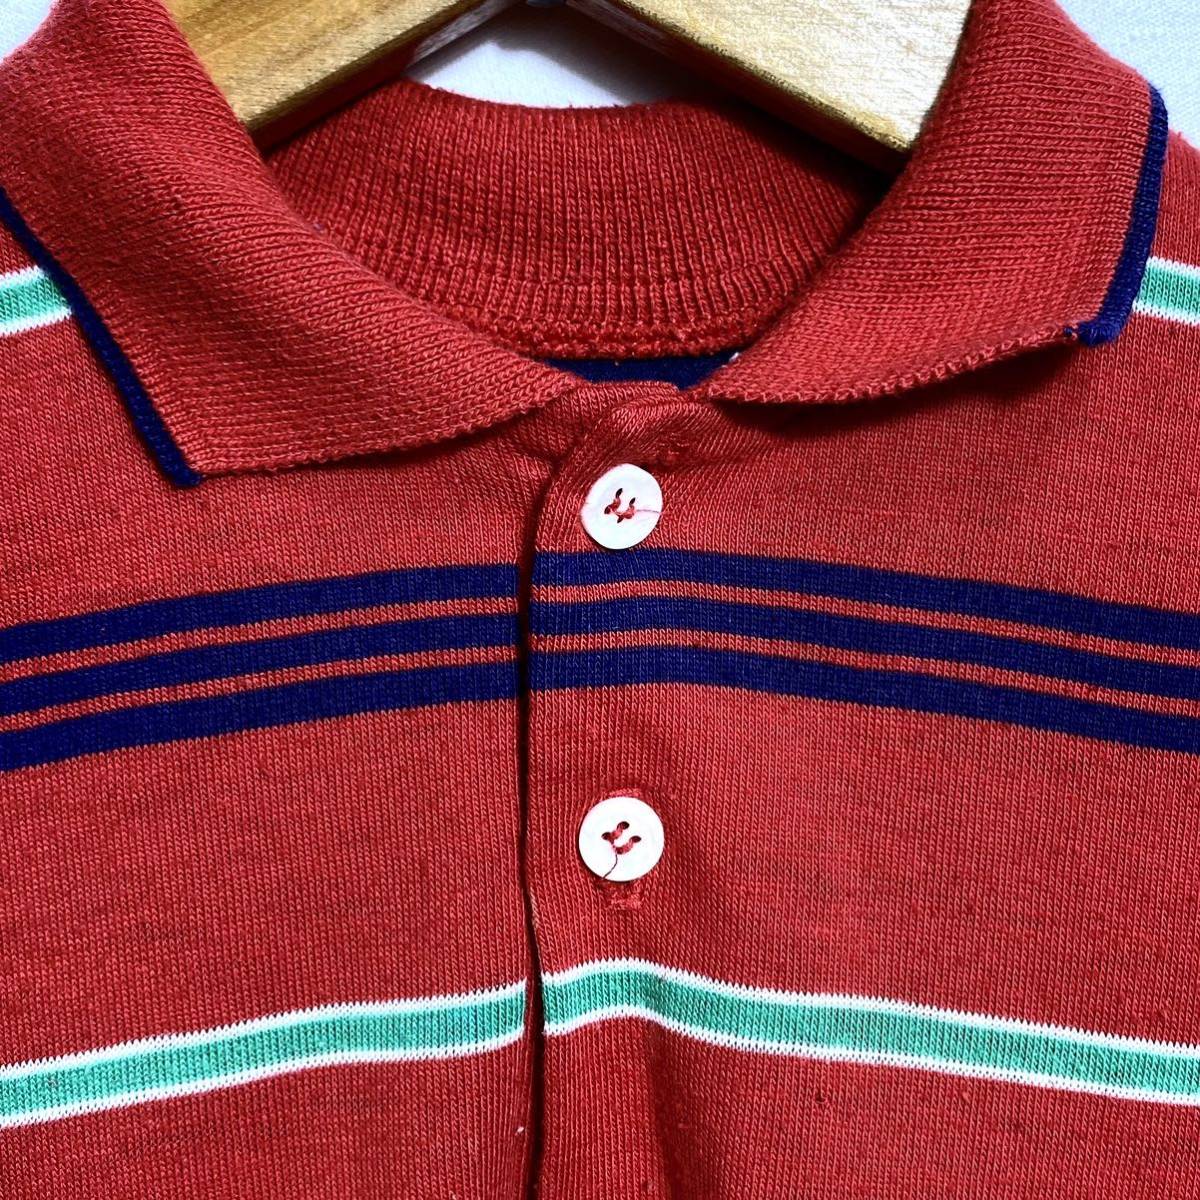 # for children Vintage USA made wonderknit design border pattern polo-shirt with short sleeves size 6 red American Casual trad ivy #